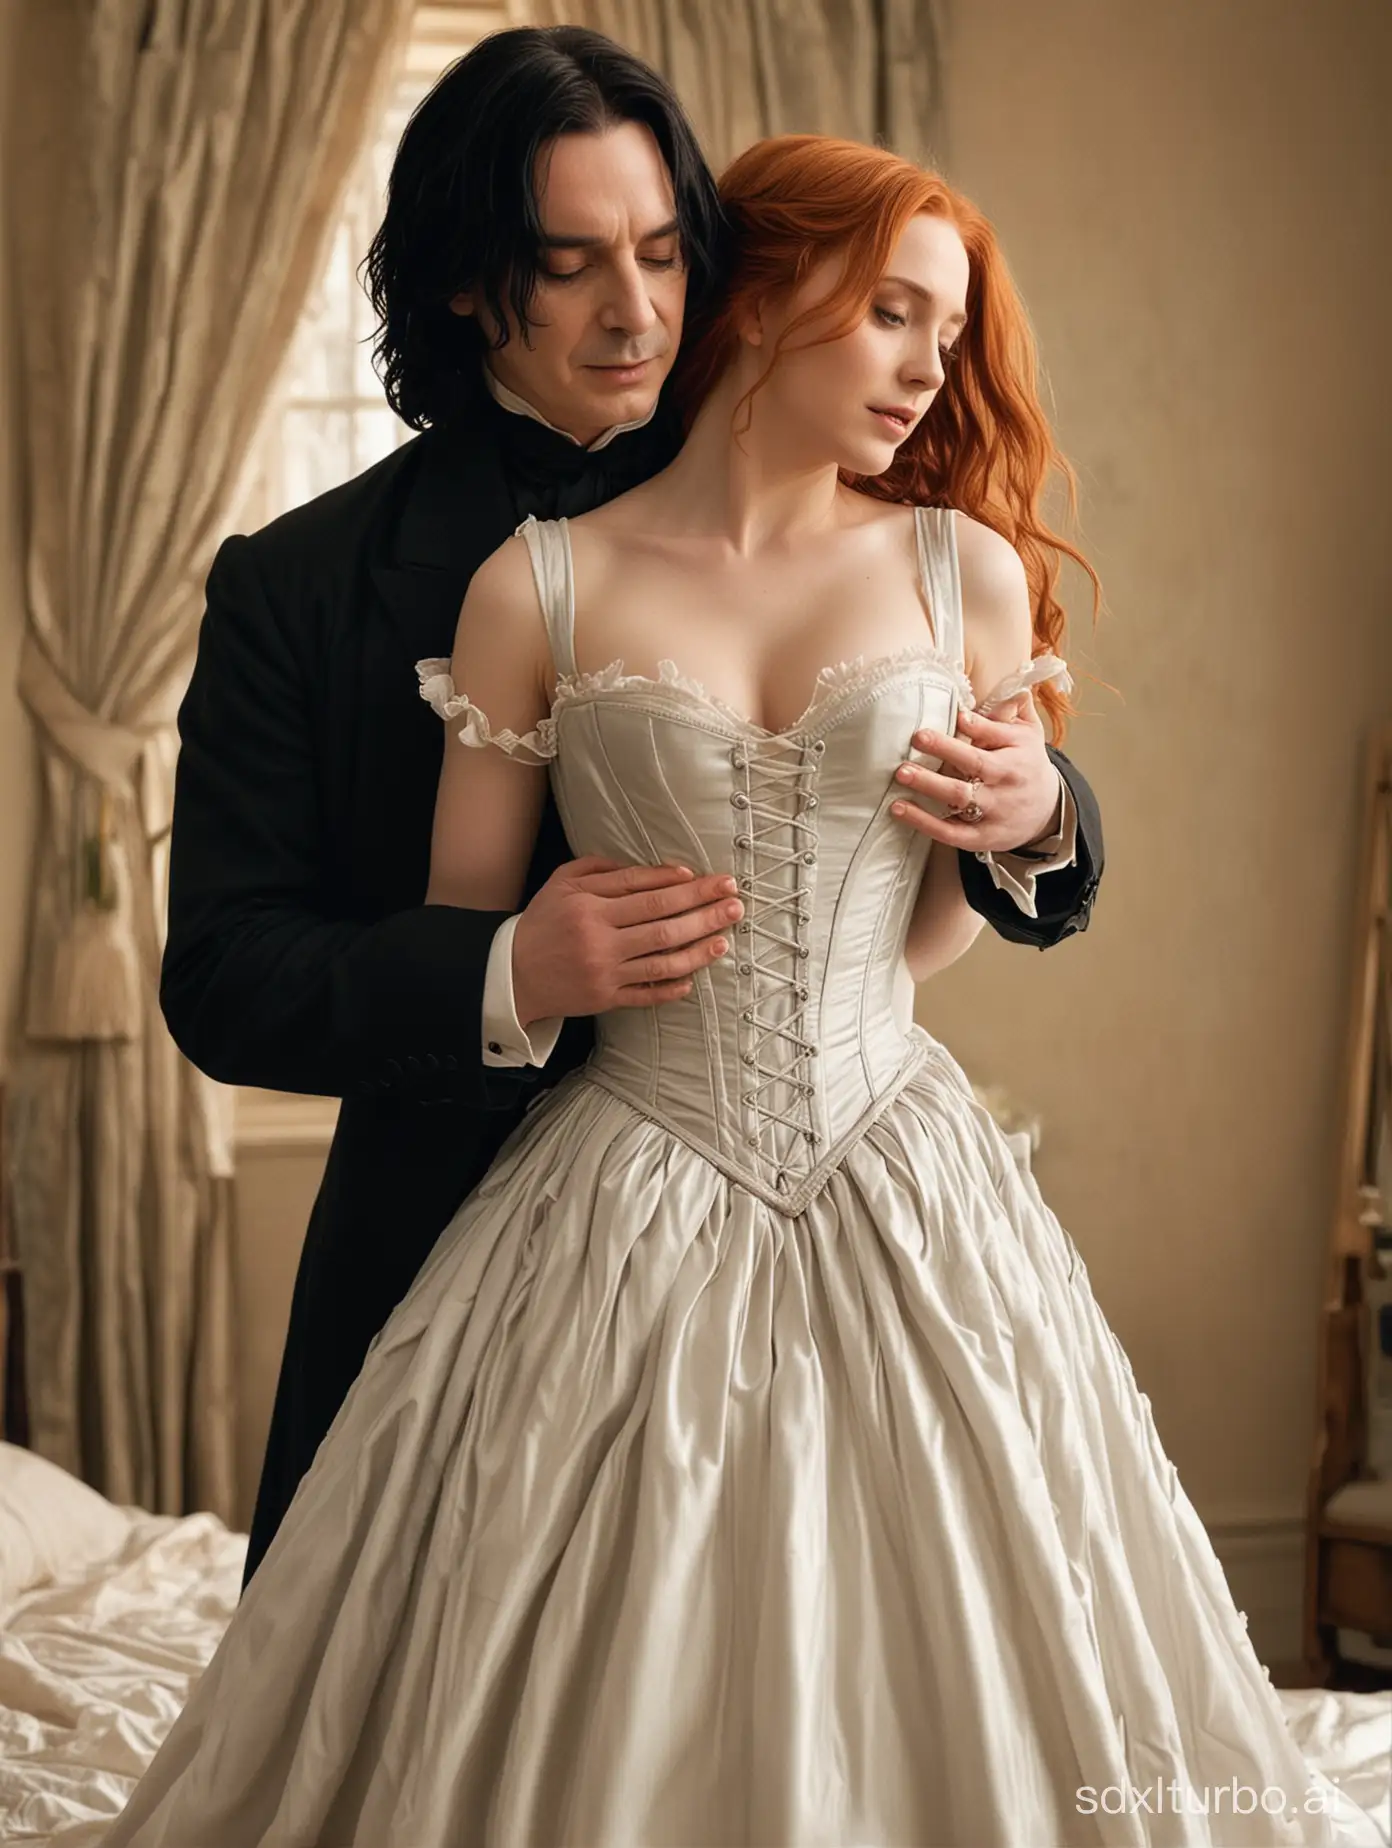 Severus Snape,24, embracing Lily Evans, 23, in his bedroom, his hands pulling her dress off her shoulders, the ribbons of her corset hand loose at her hips